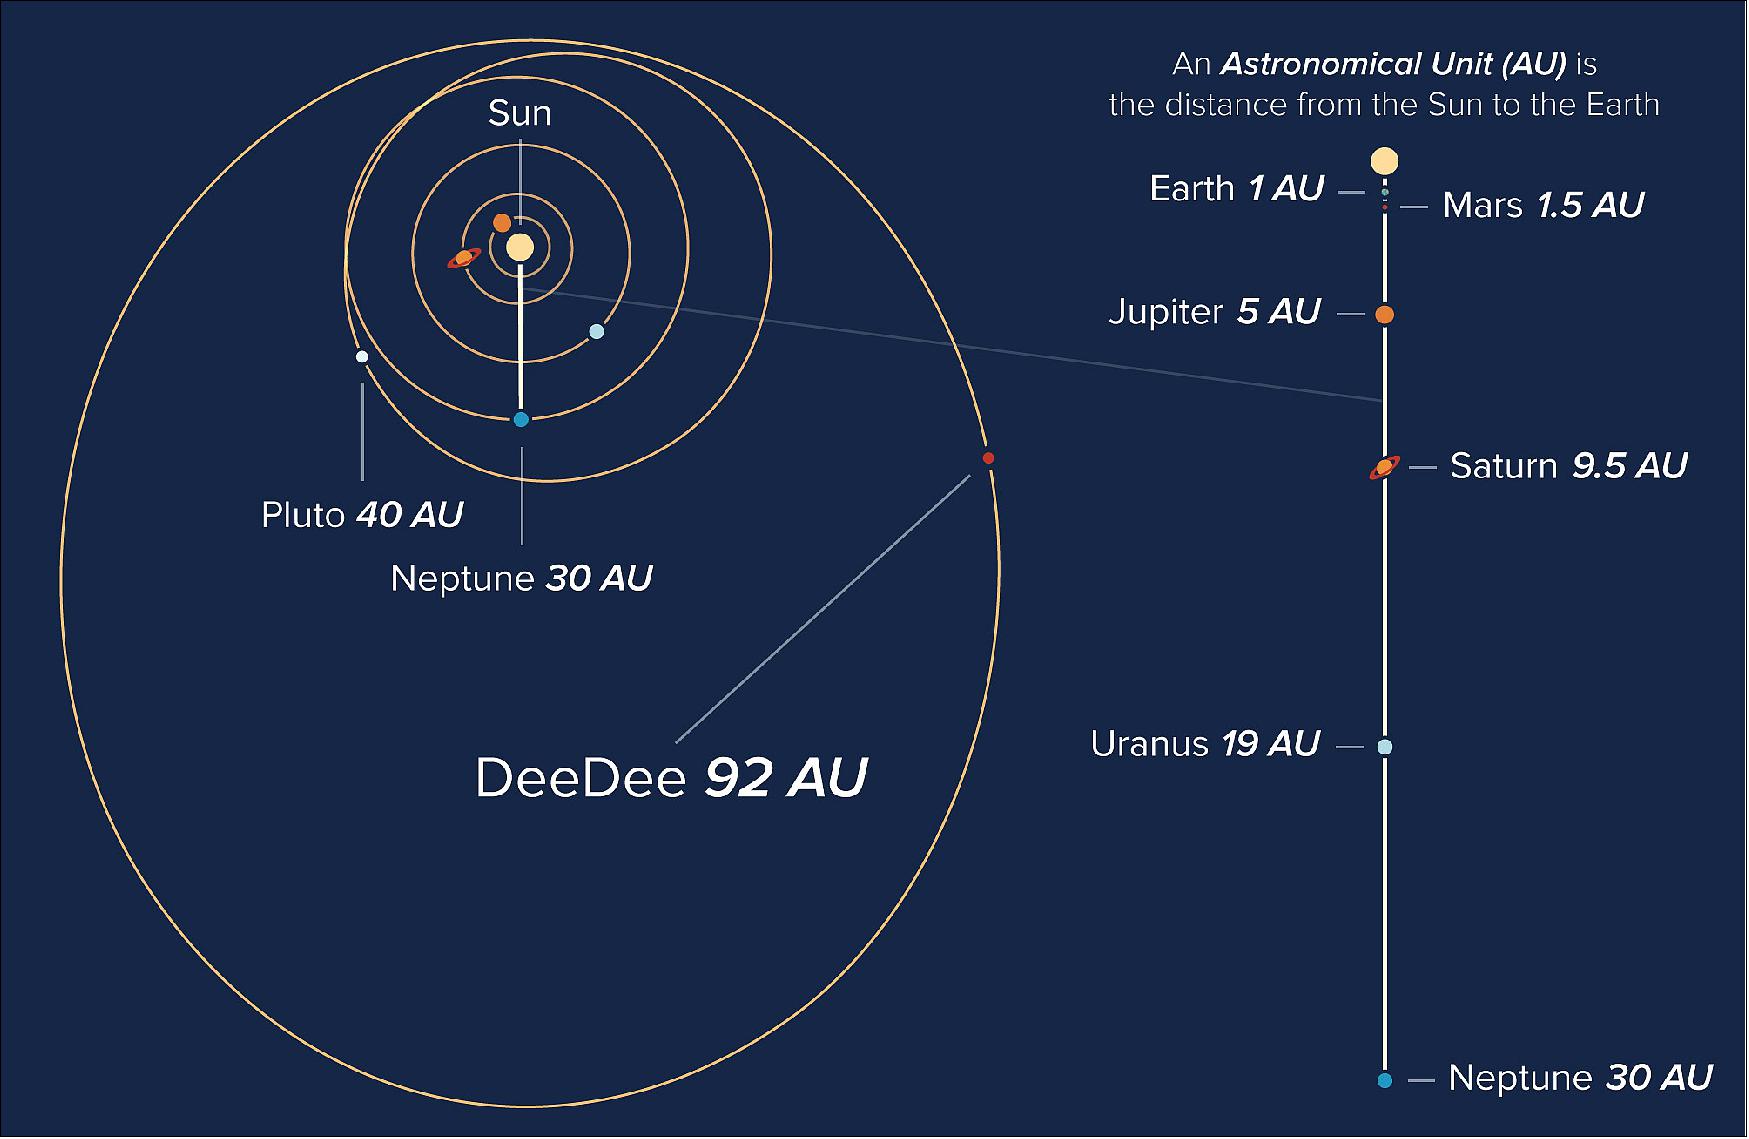 Figure 36: Orbits of objects in our solar system, showing the current location of the planetary body 'DeeDee' (image credit: Alexandra Angelich, NRAO/AUI/NSF)